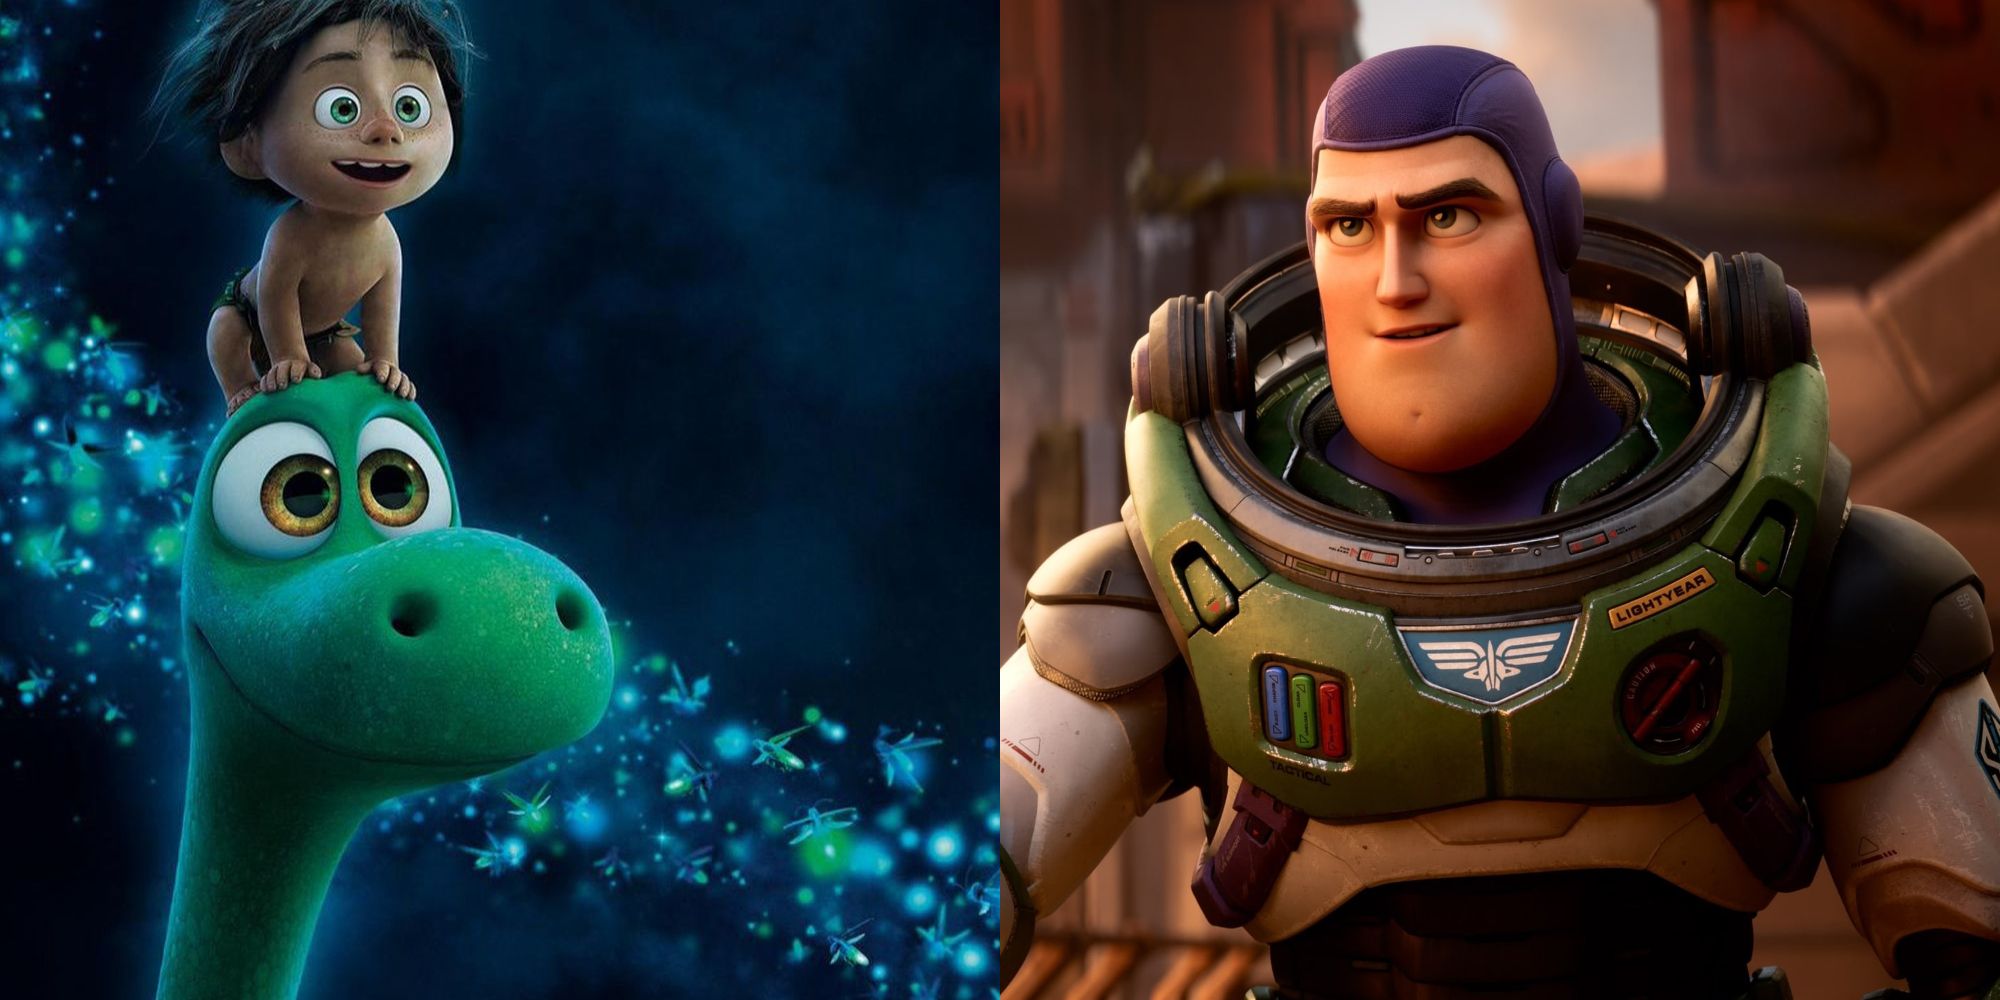 The Best And Worst Moments In Pixar's Lightyear